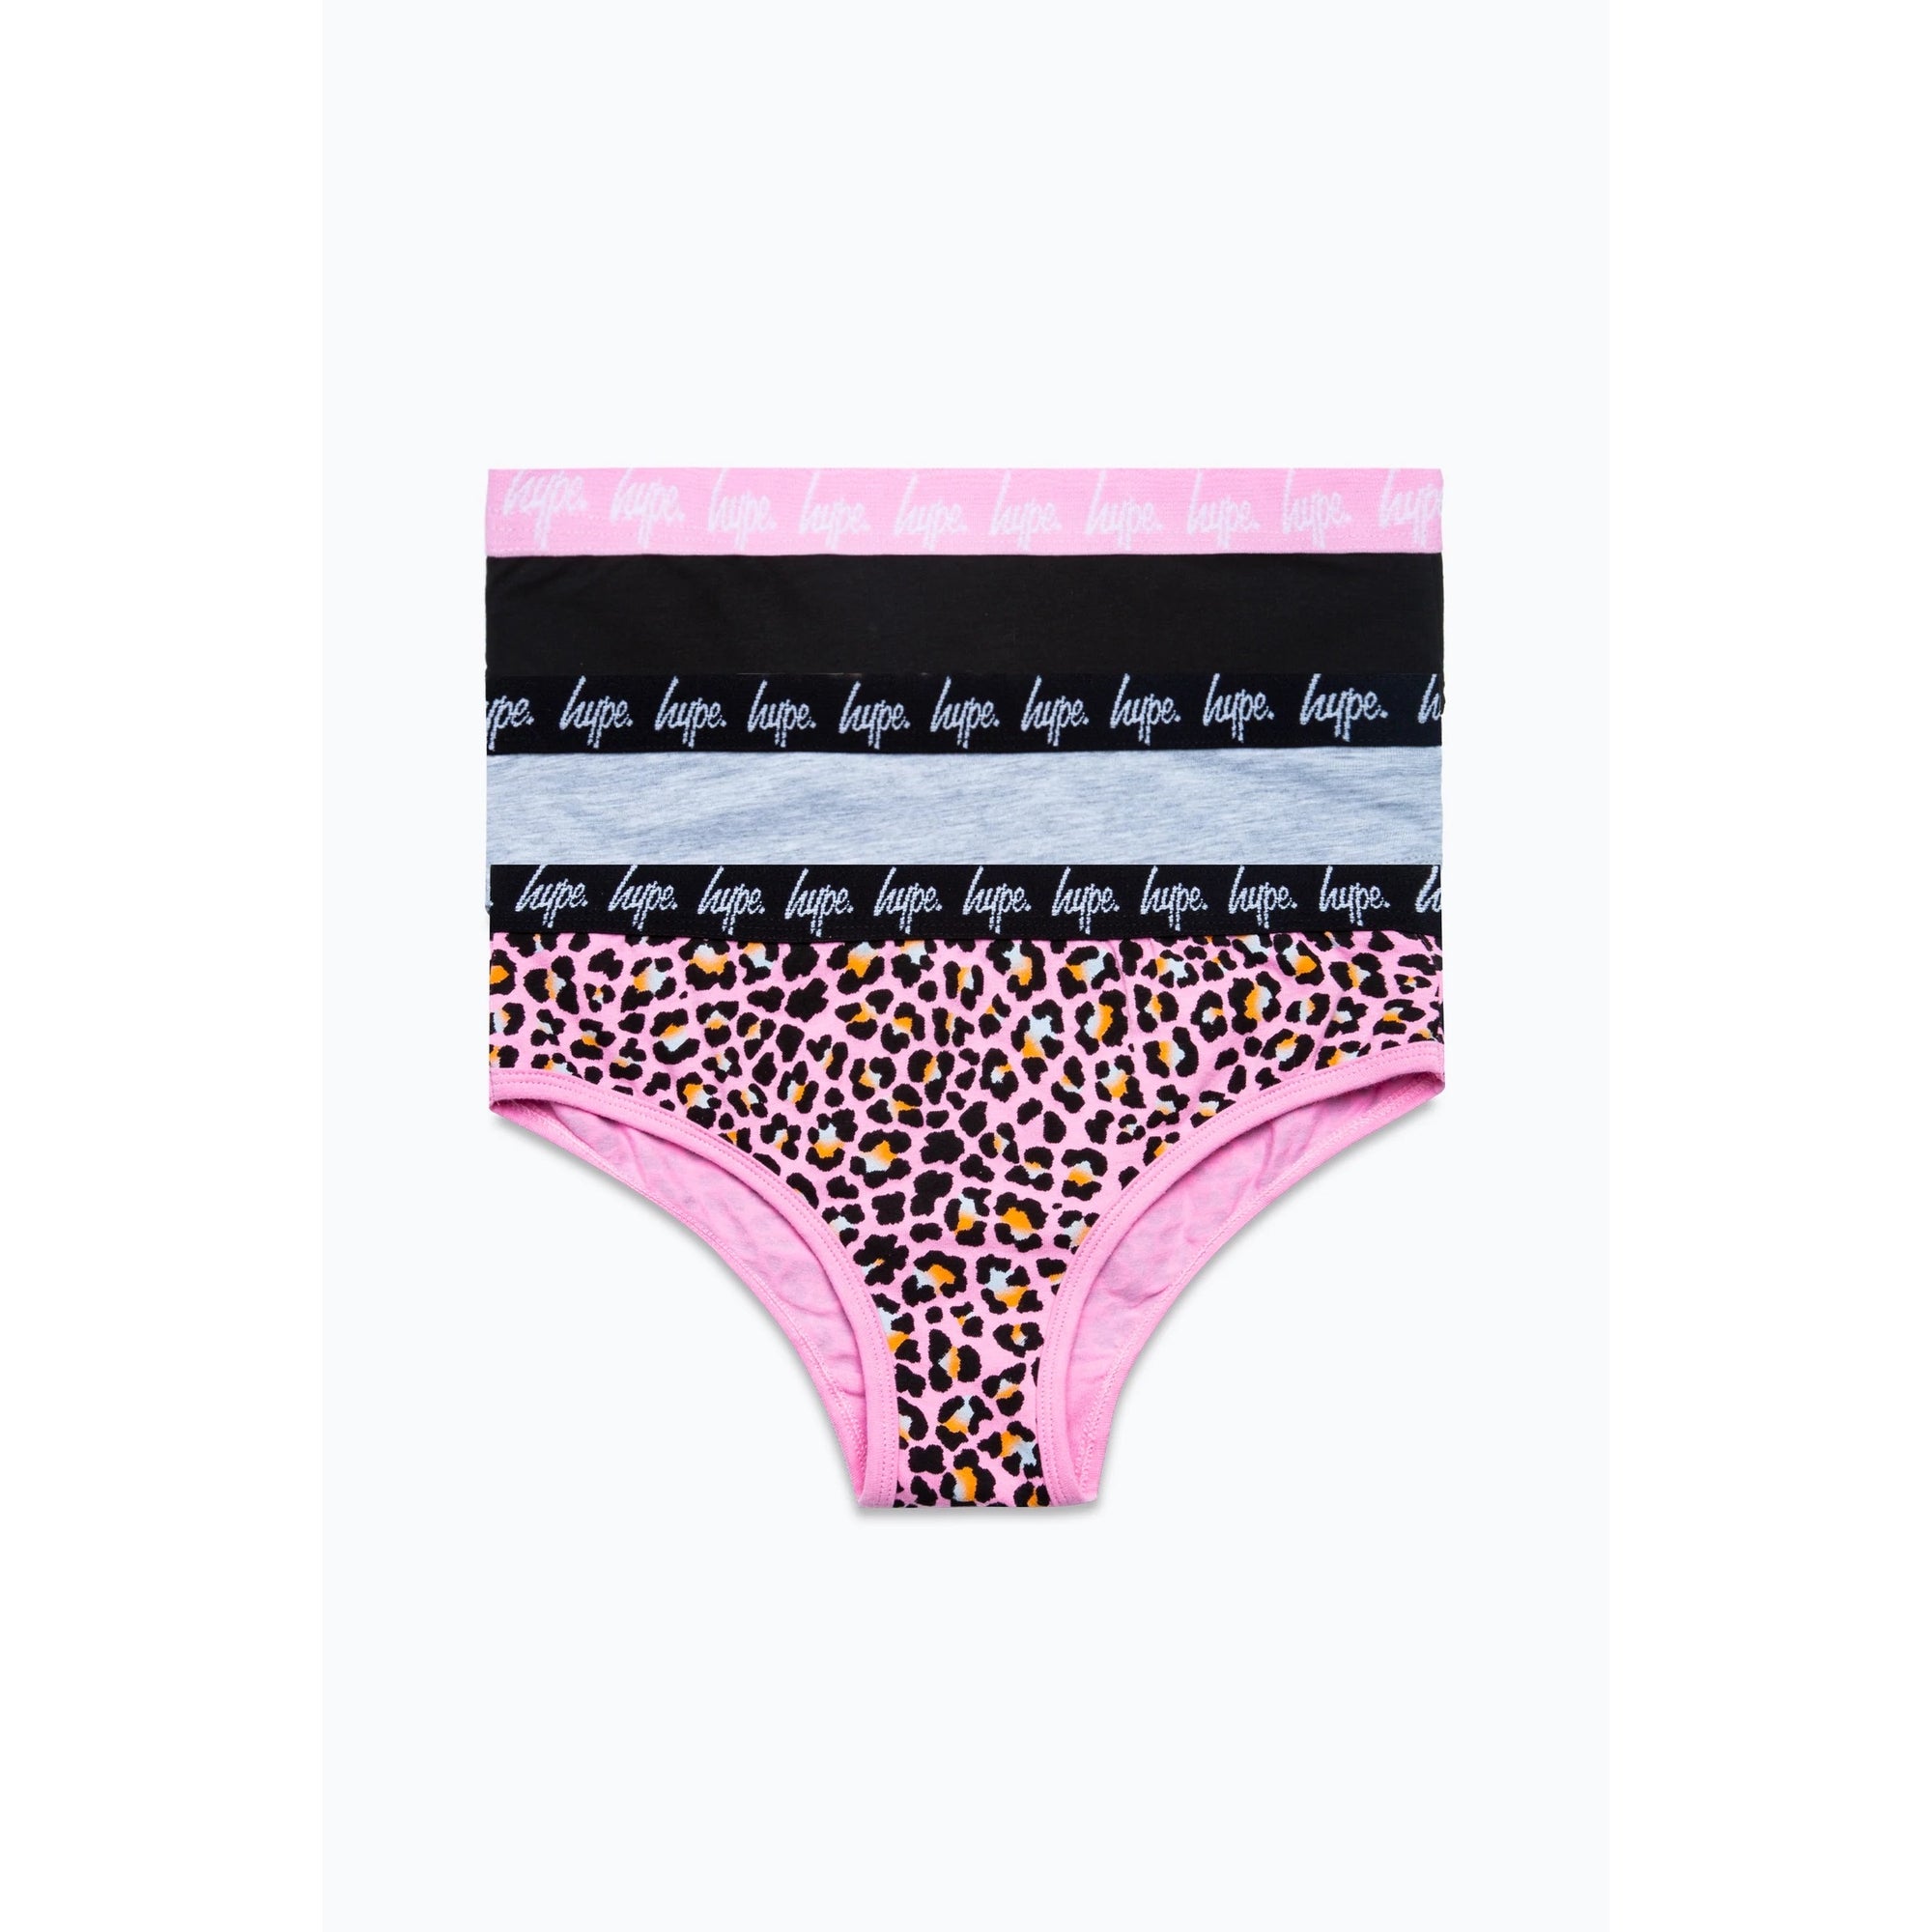 Hype 3 Pack Disco Leopard Briefs Twbt330 Clothing 7-8YRS / Pink,9-10YRS / Pink,11-12YRS / Pink